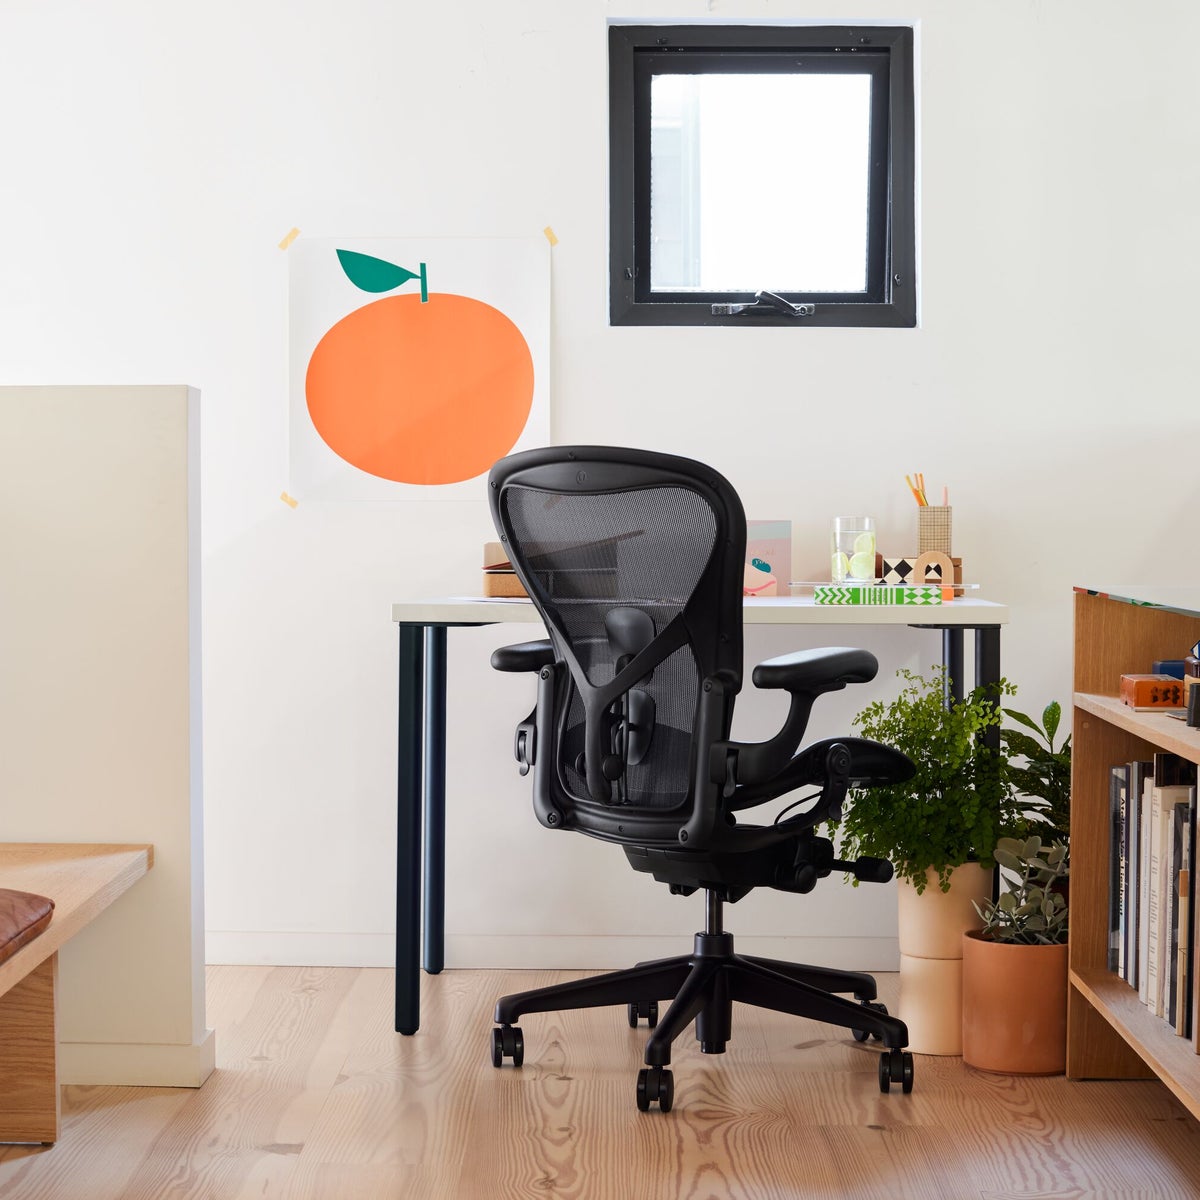 At håndtere taxa Grav Win an iconic Aeron Chair from Herman Miller | The Independent